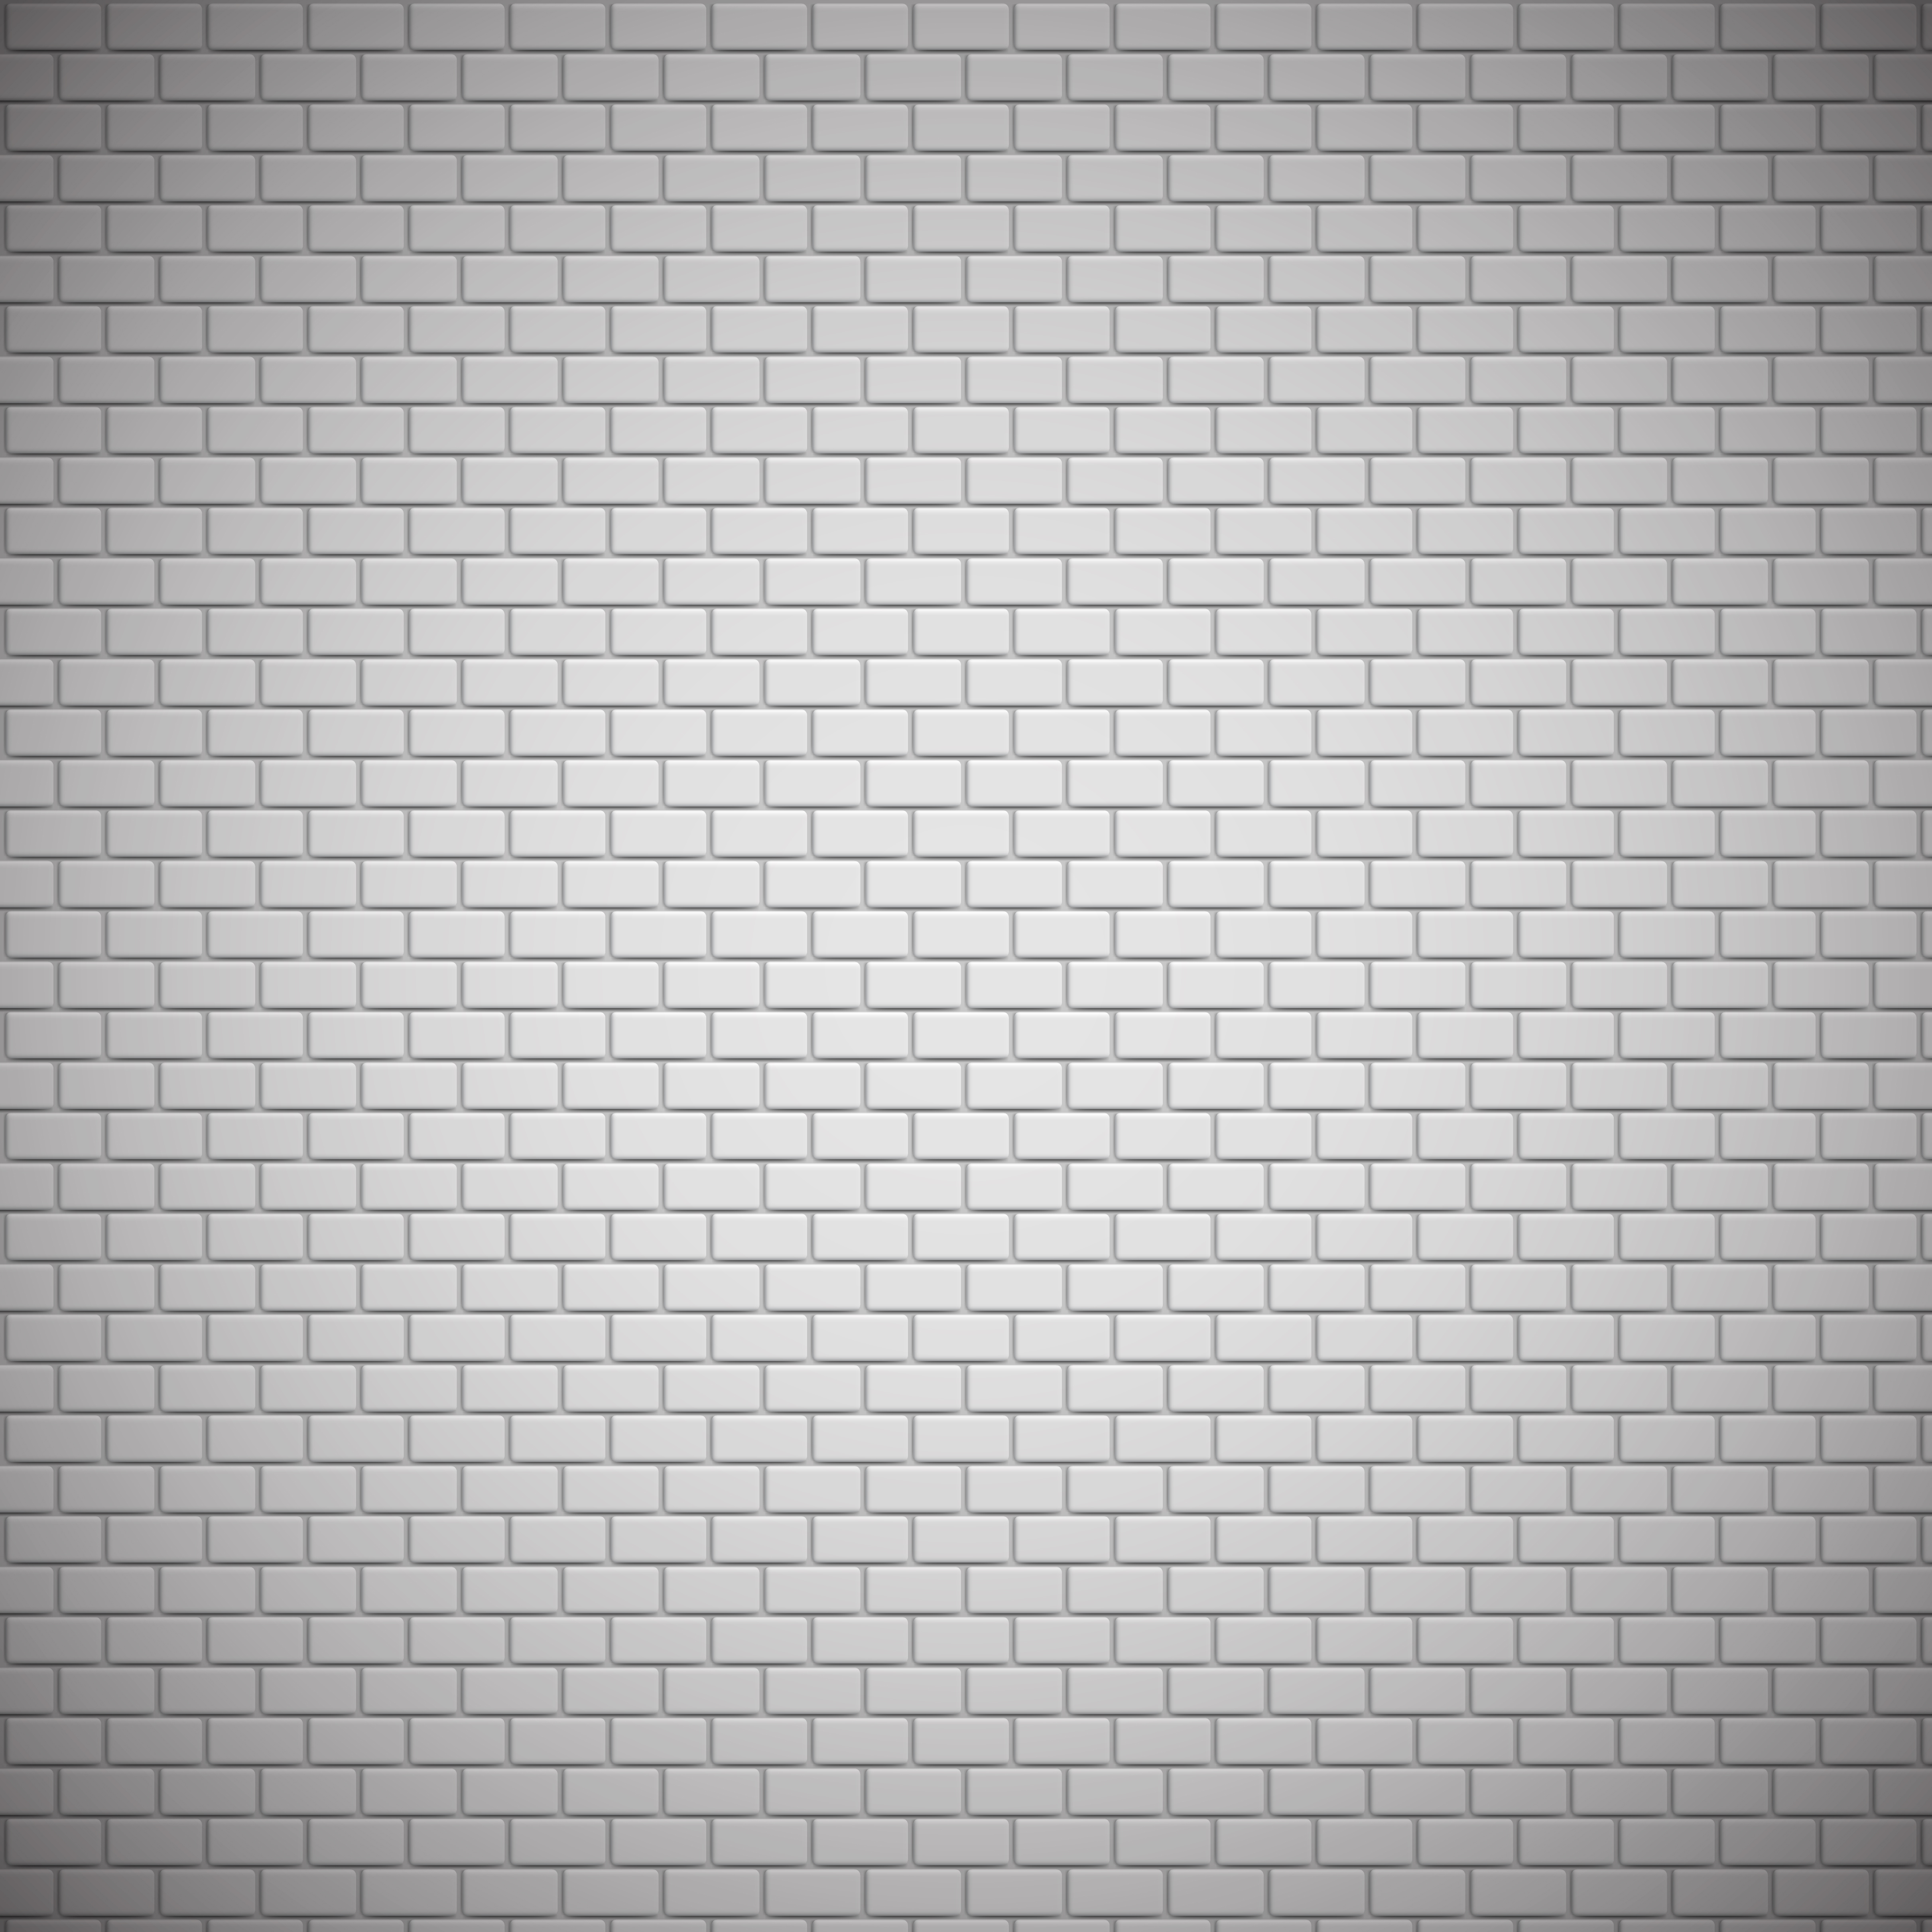 Realistic high-detailed brick wall pattern, vector illustration 312875